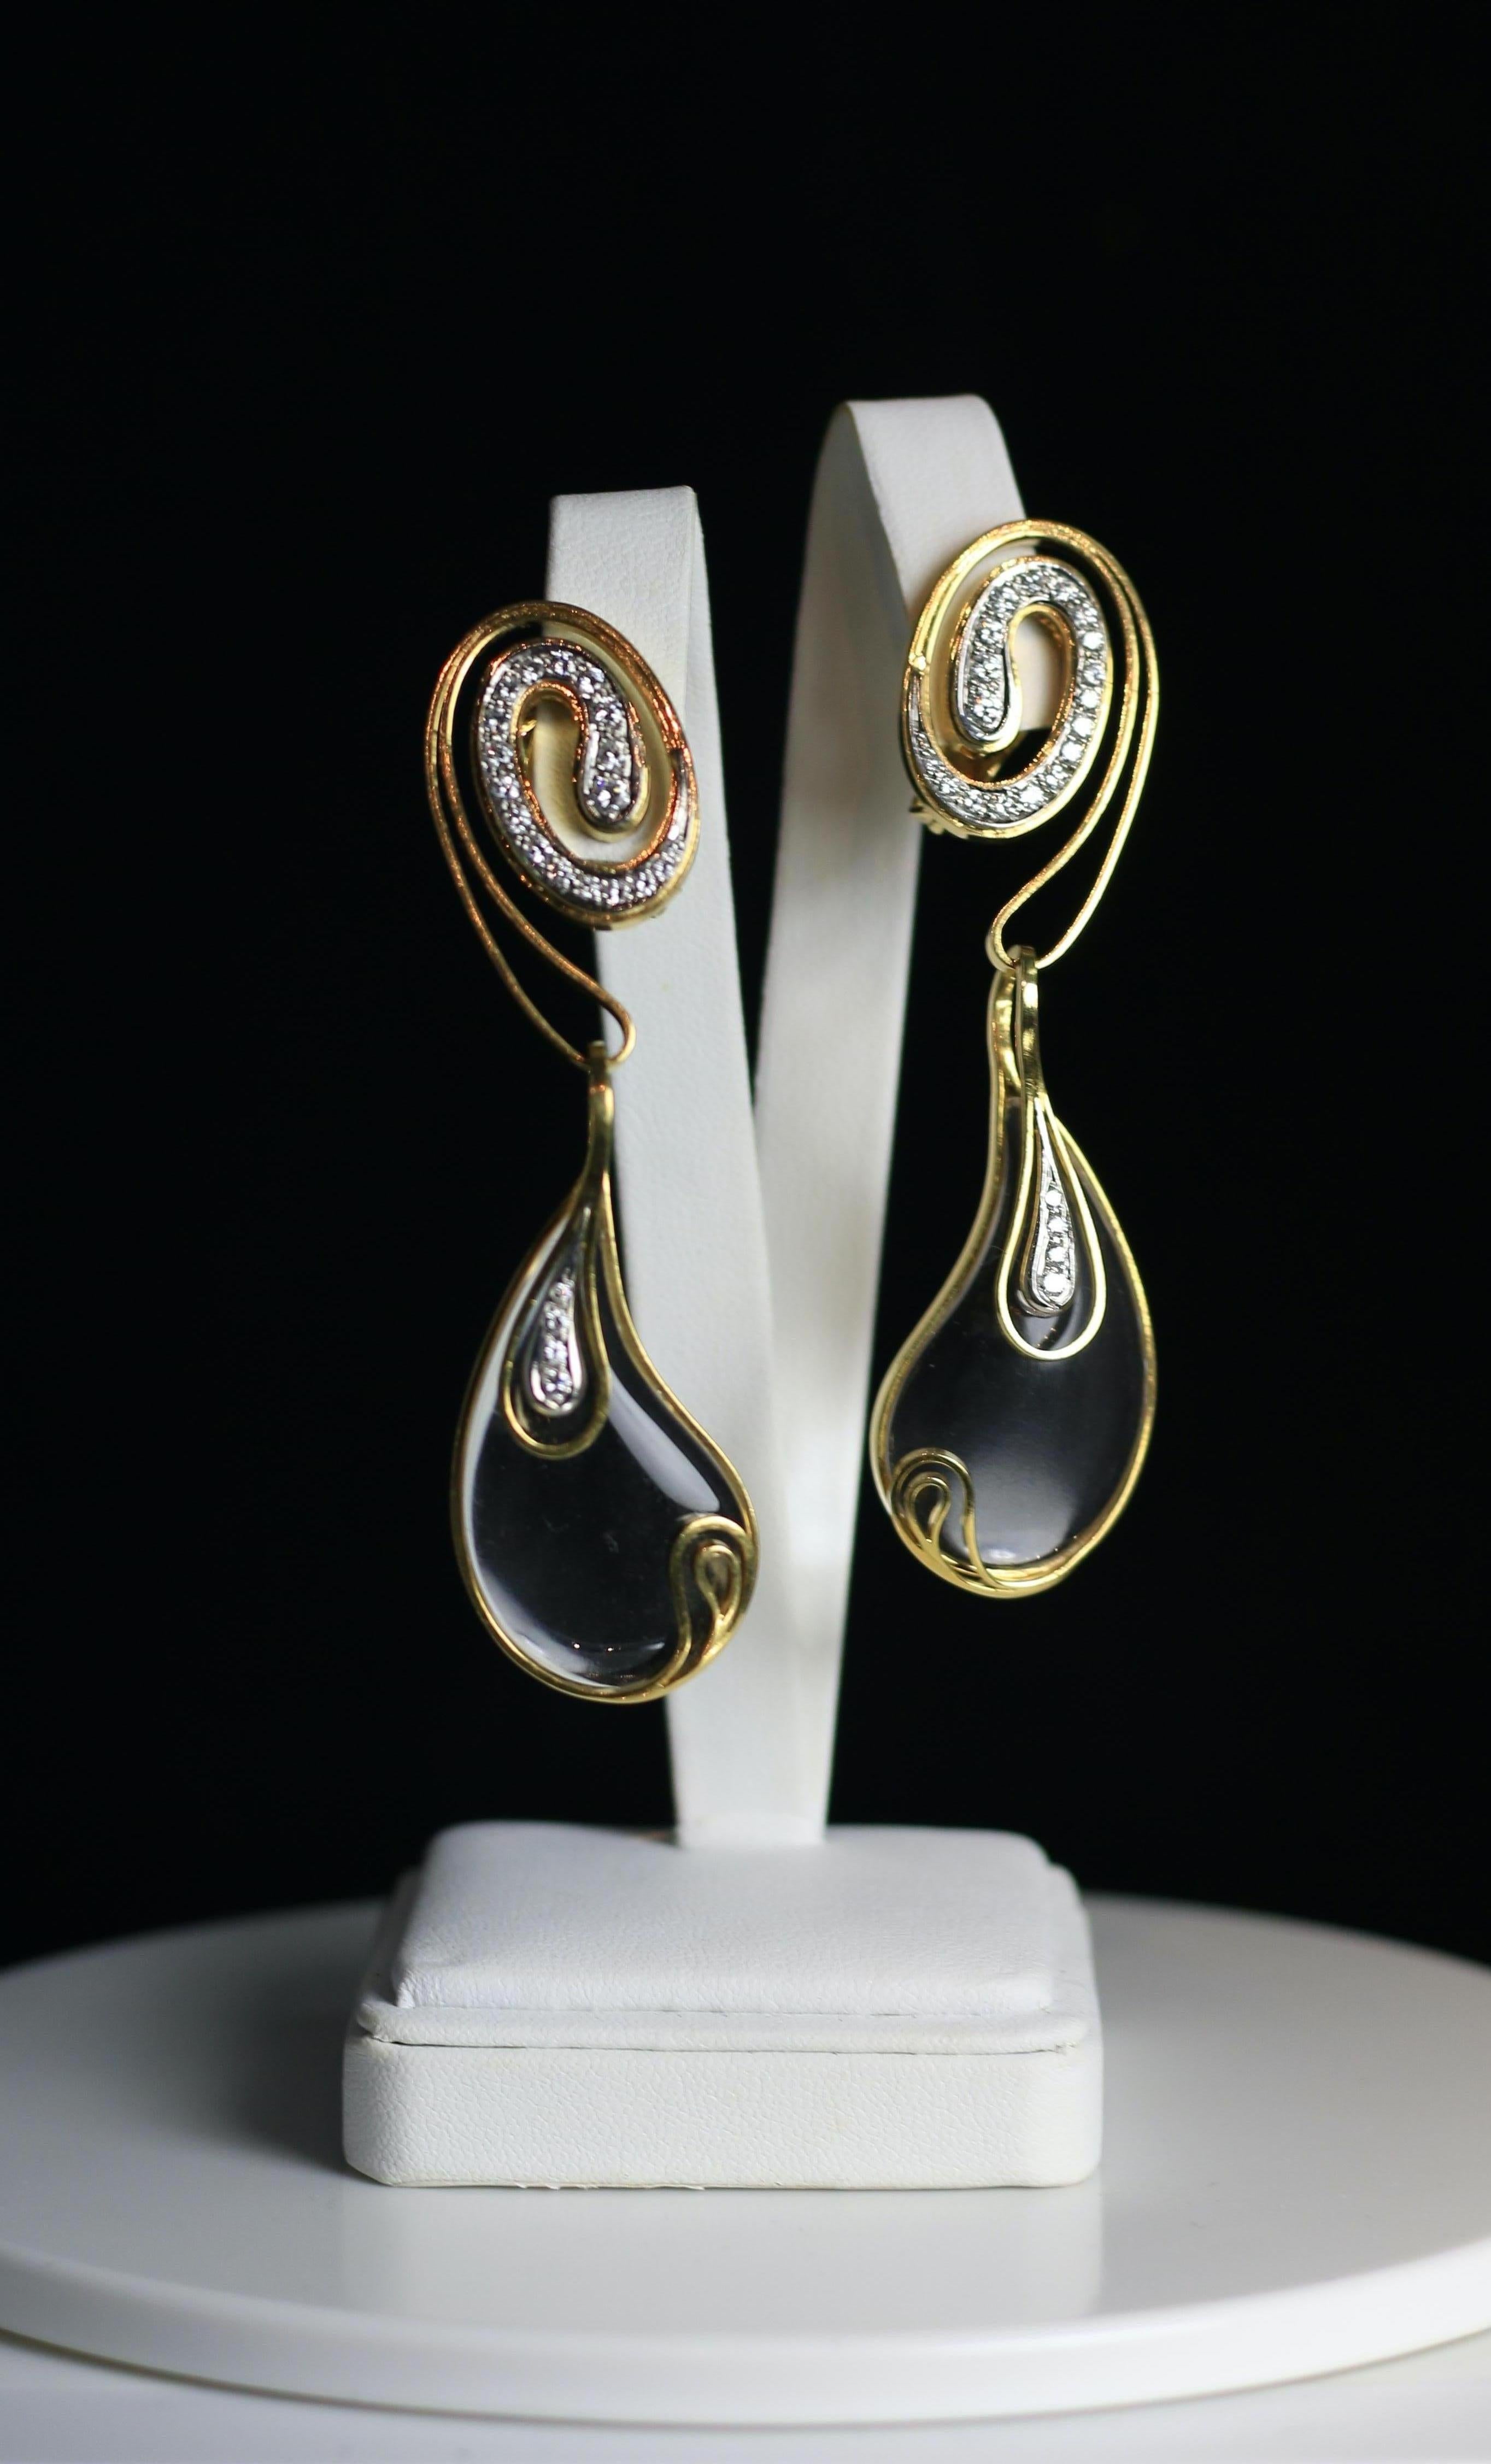 Fabulous Lalounis 18K yellow gold and Diamond with Quartz Crystal completely fabulous Earrings.  Dangle Drops will make a big statement! Swirling Ecstasy Design with Diamonds in a teardrop shape. 
